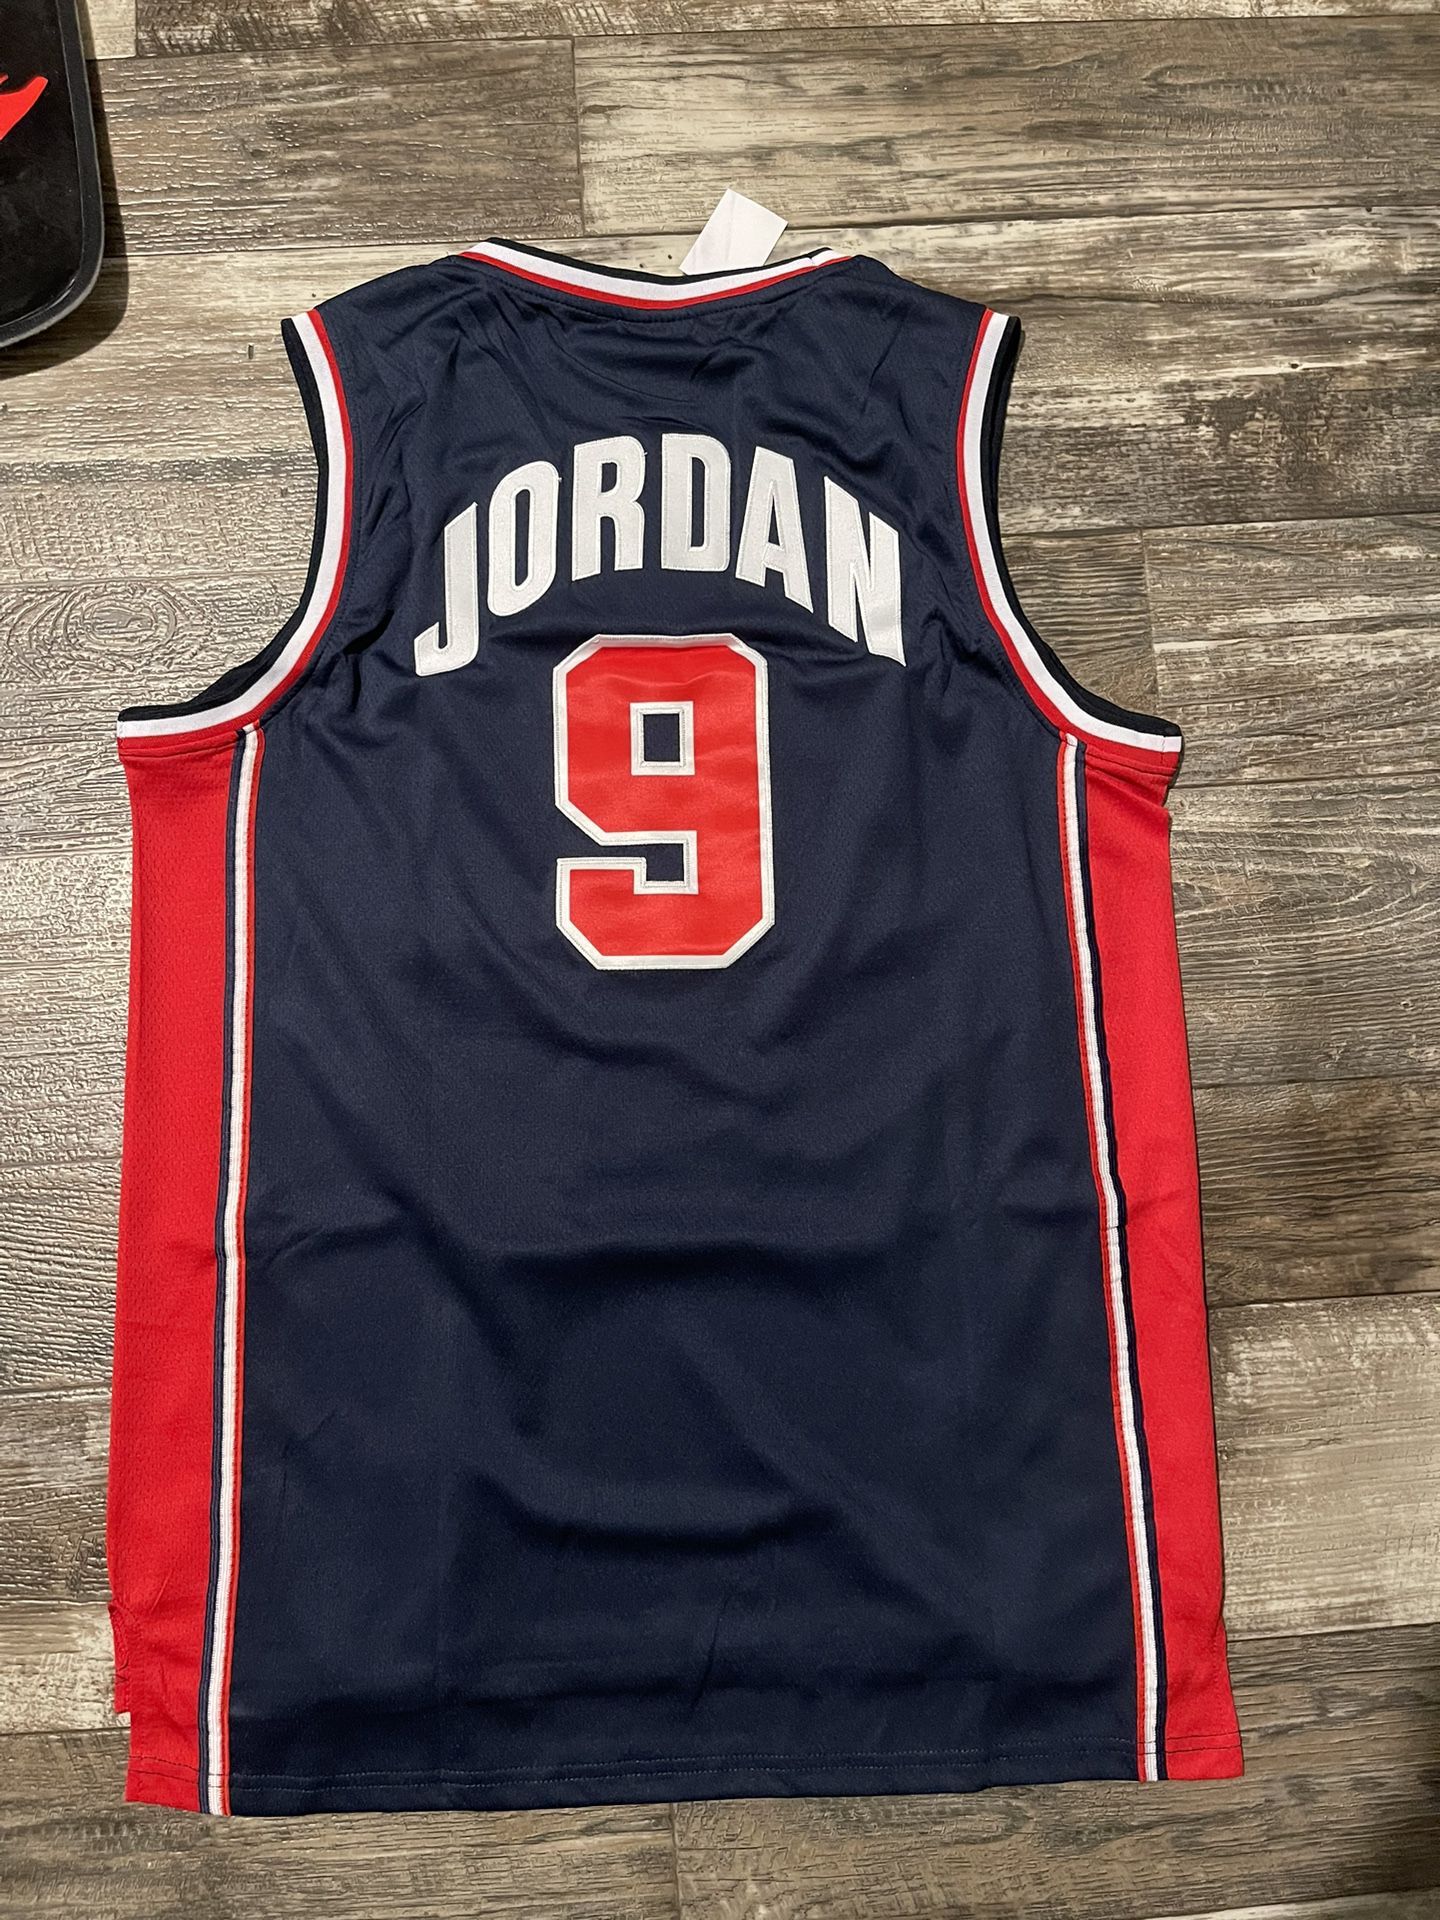 Michael Jordan 1996-97 Black Red Pinstriped Jersey for Sale in Kissimmee,  FL - OfferUp